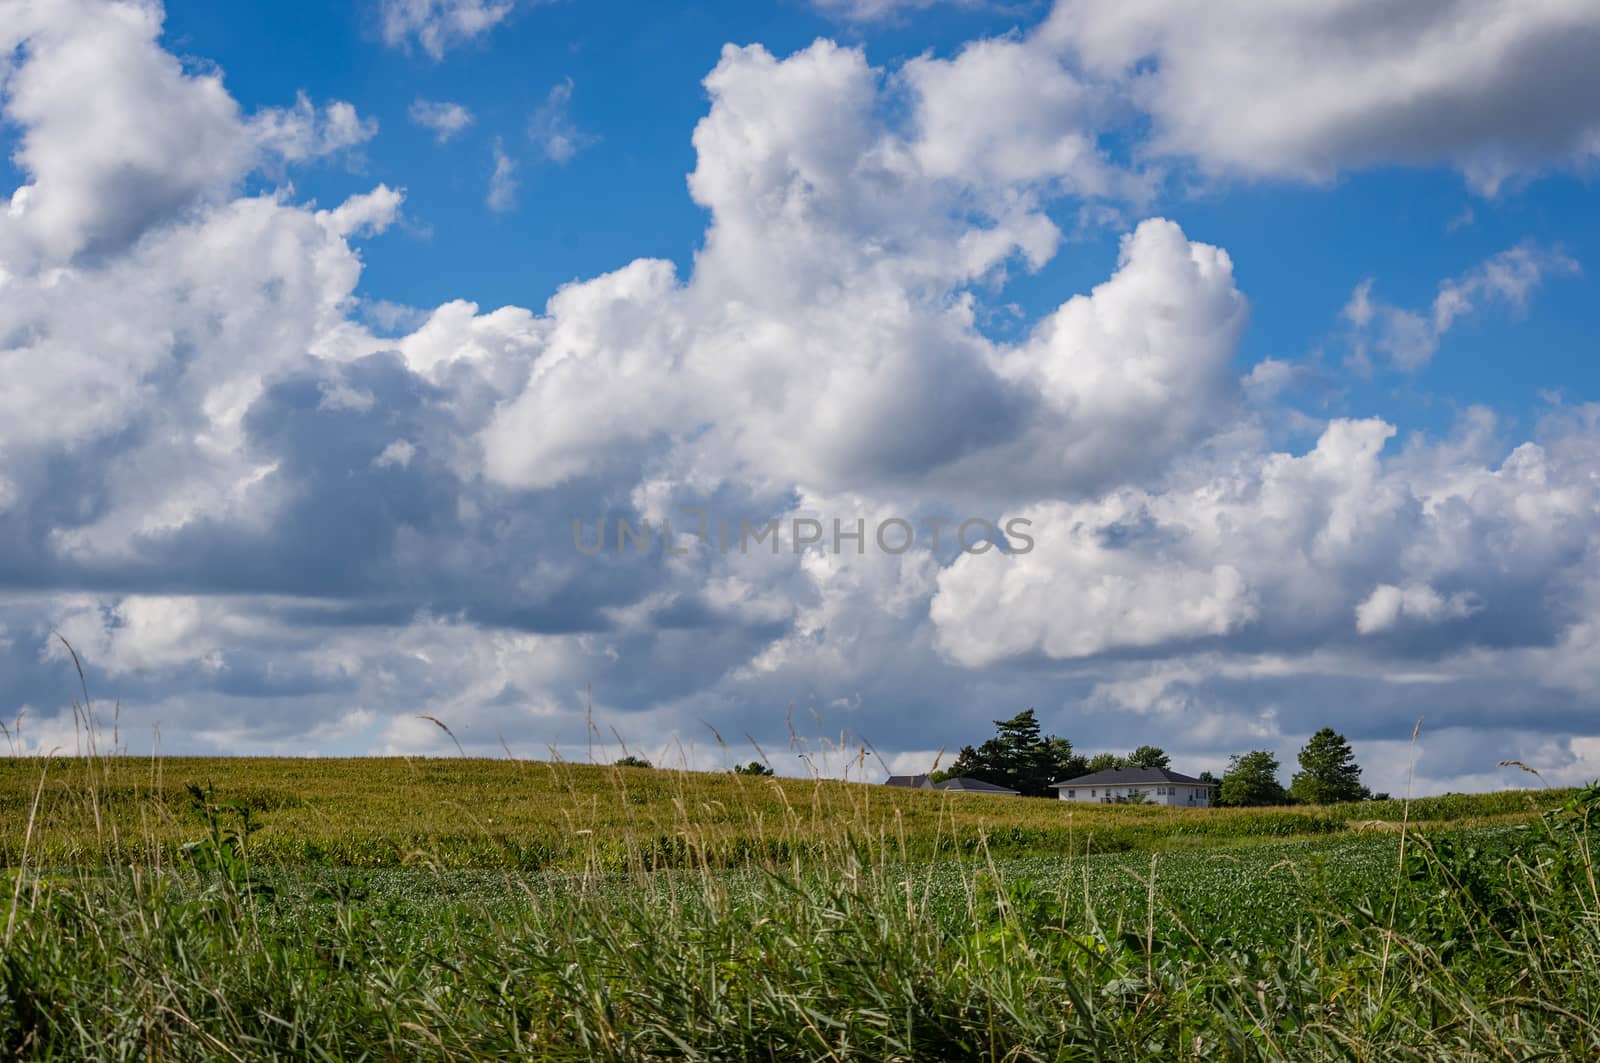 Farm on countryside with blue sky and clouds.